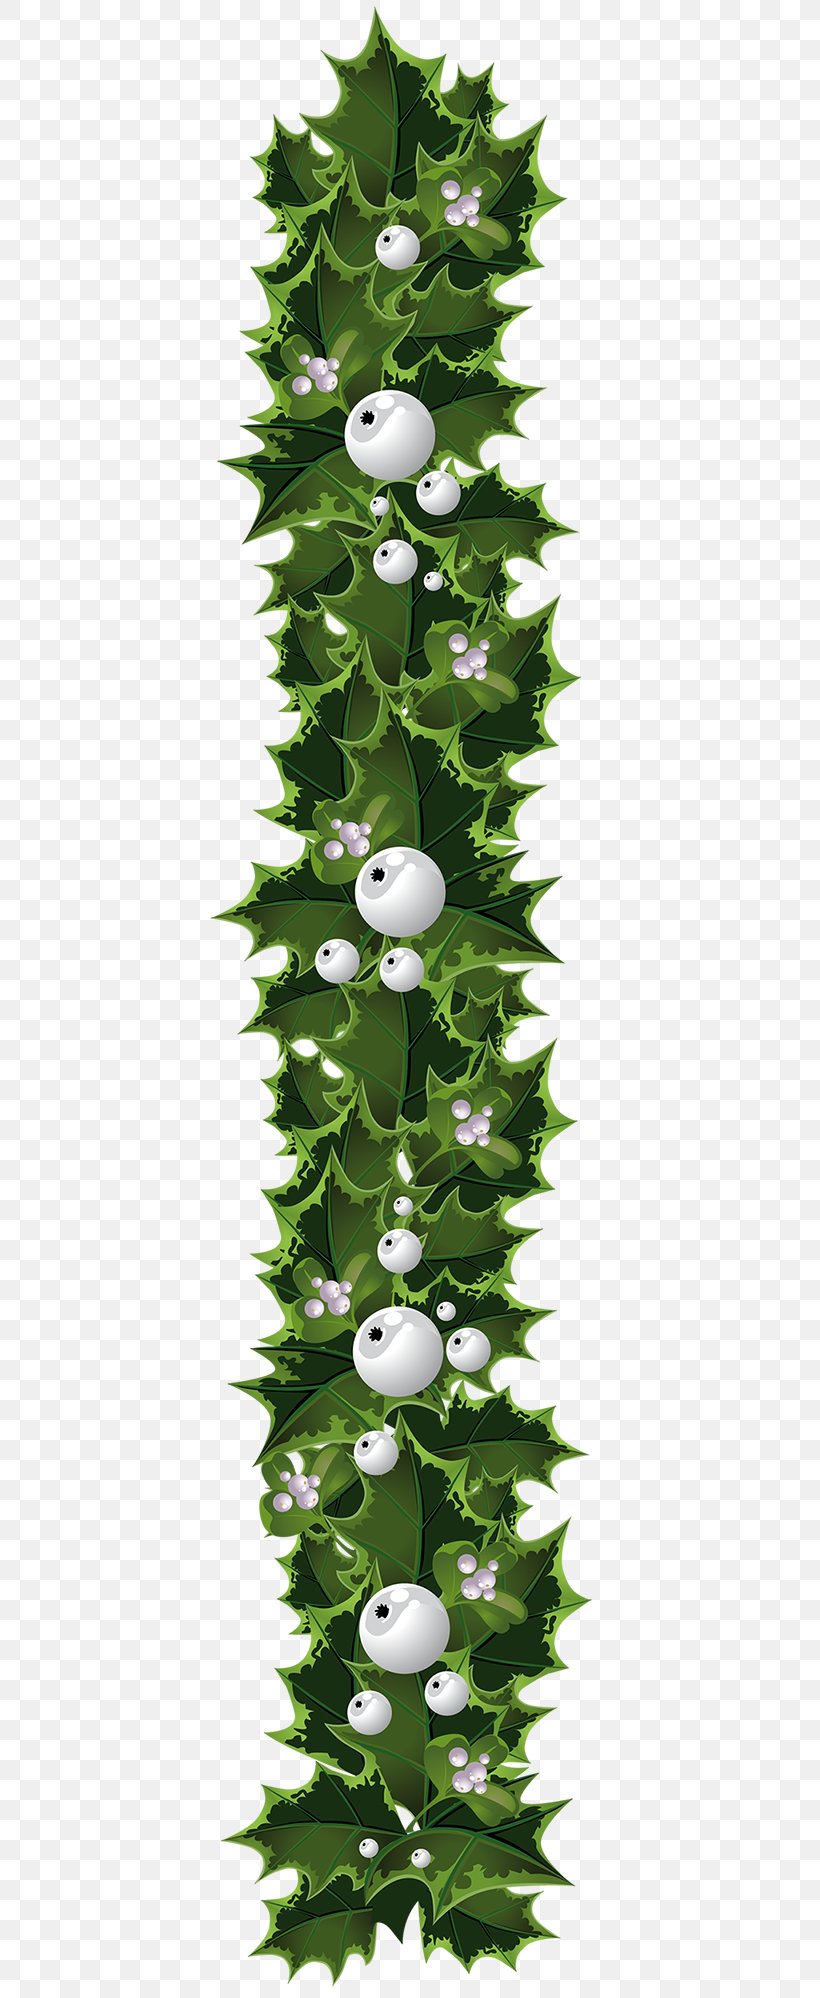 Garland Christmas Wreath Clip Art, PNG, 400x1998px, Garland, Christmas, Christmas Decoration, Christmas Tree, Flora Download Free